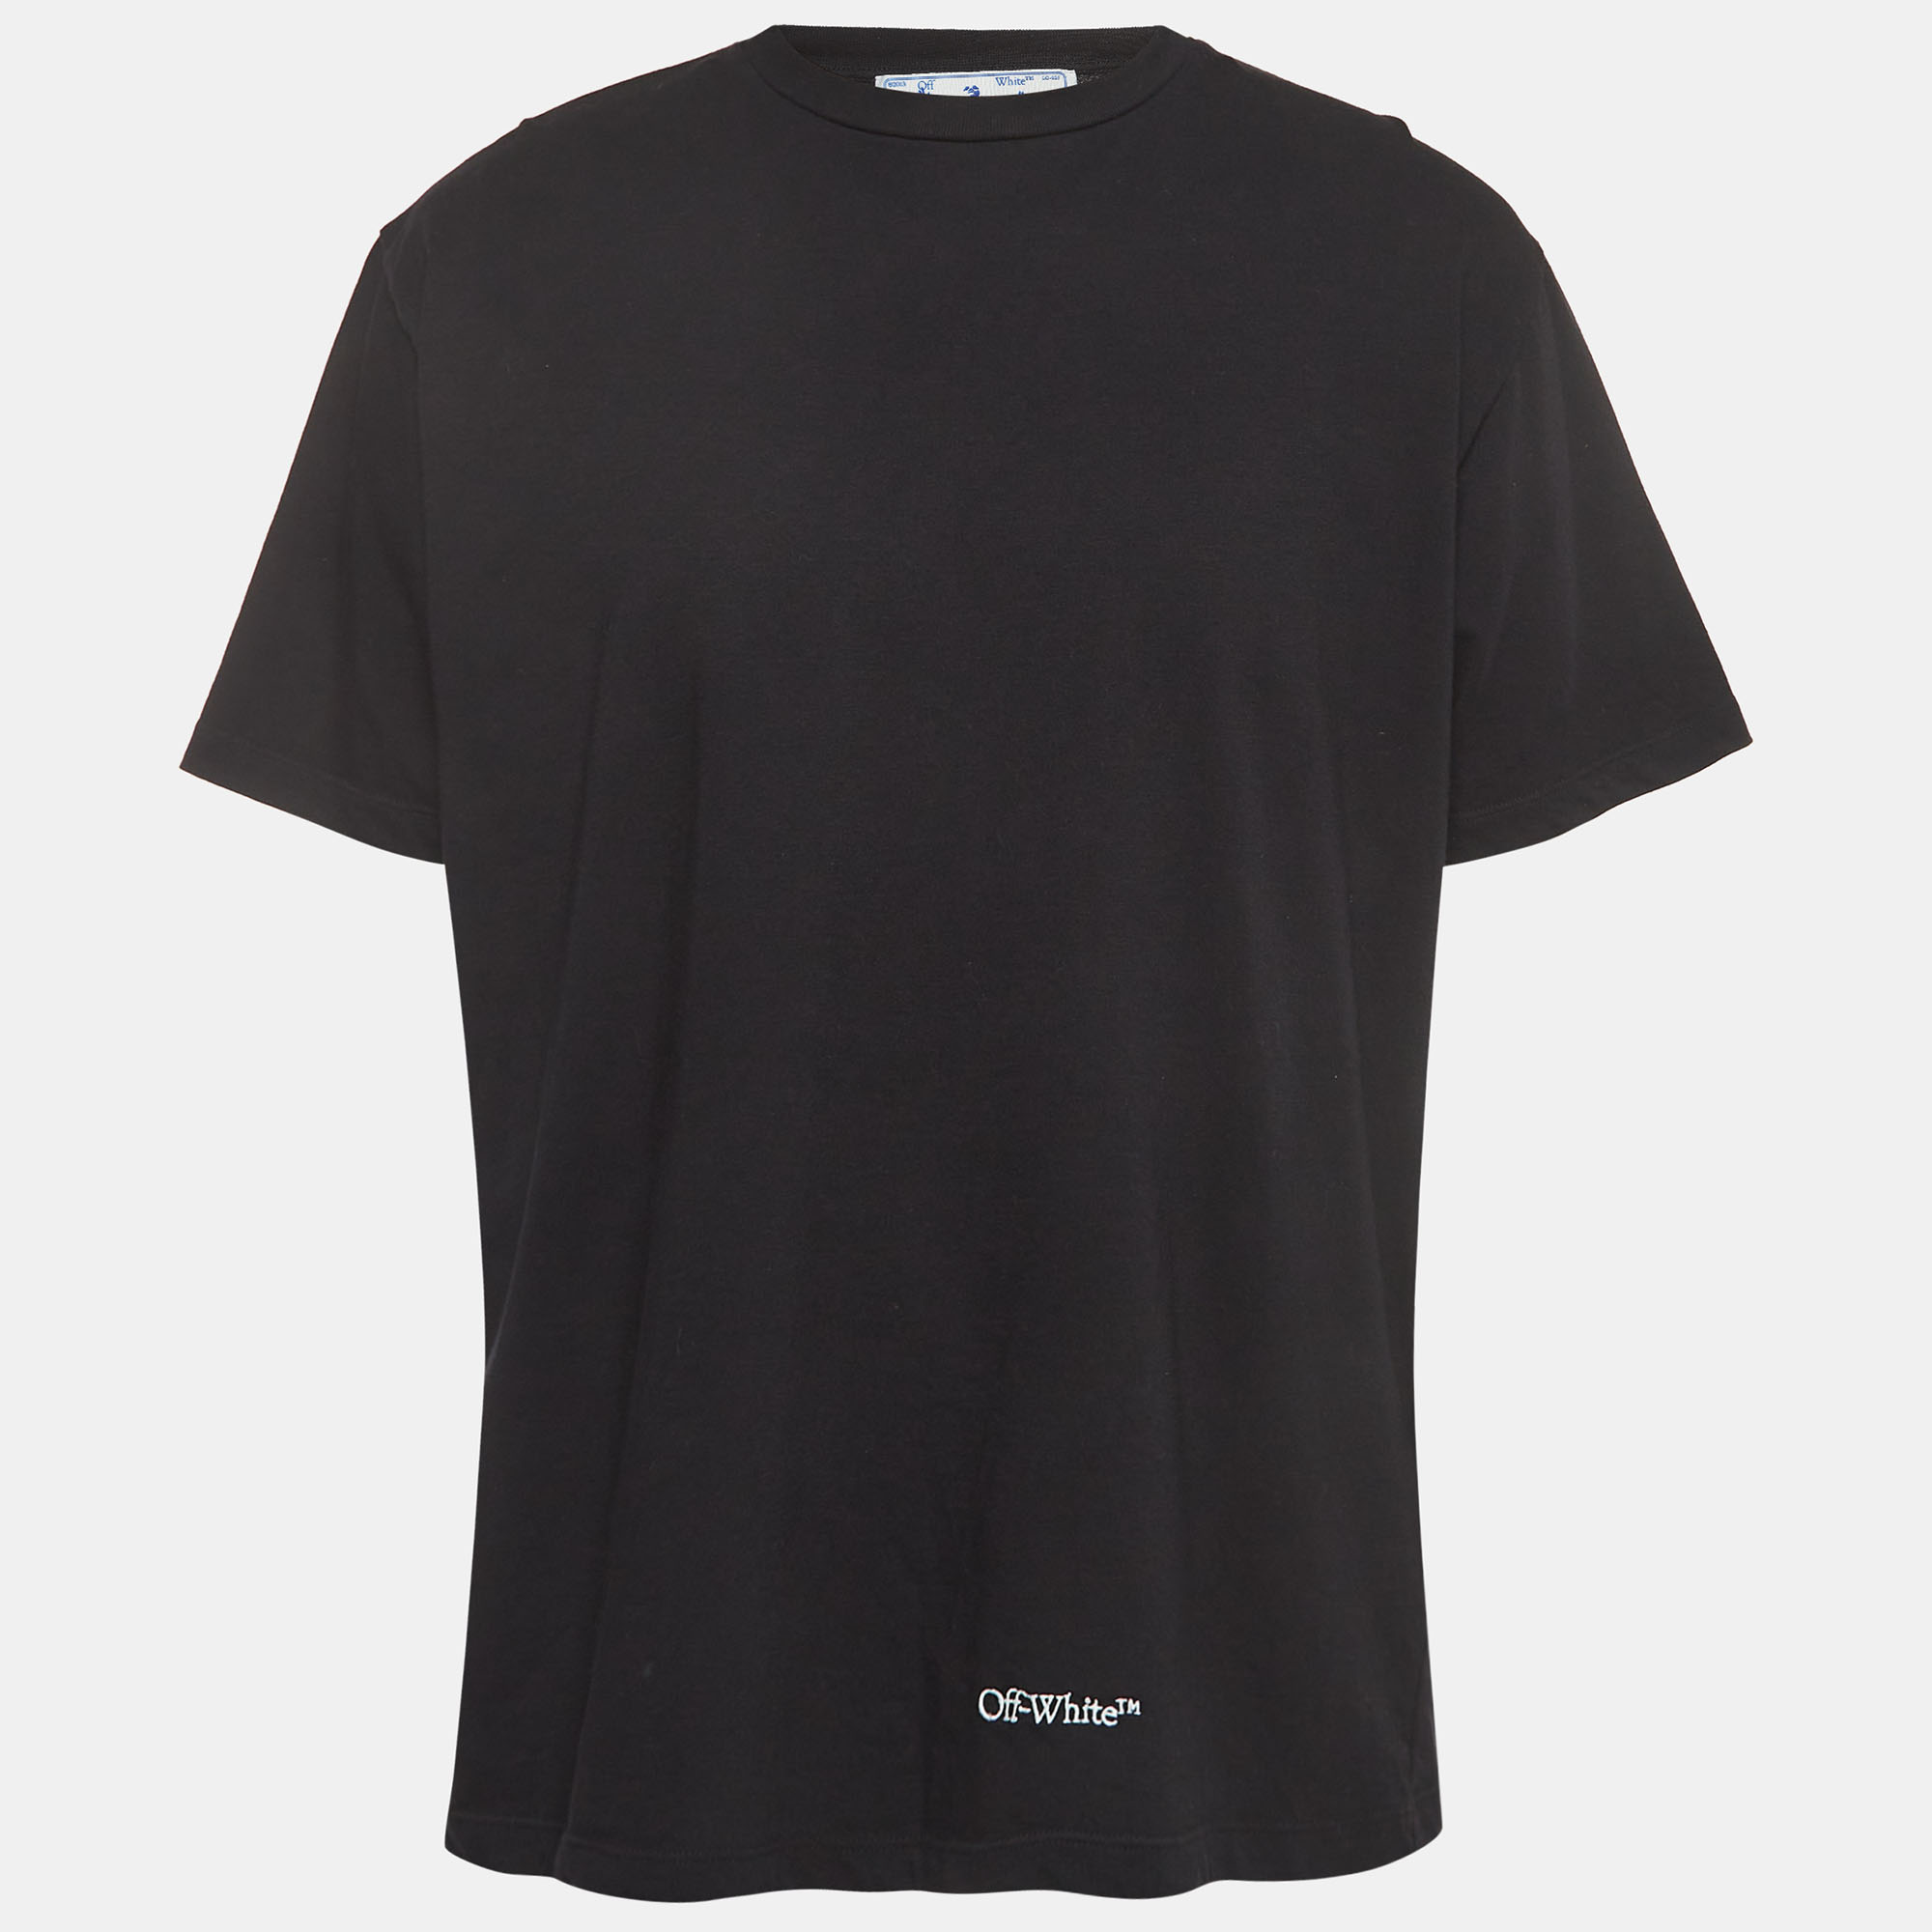 Off-White Black Embroidered Cotton Crew Neck T-Shirt XS